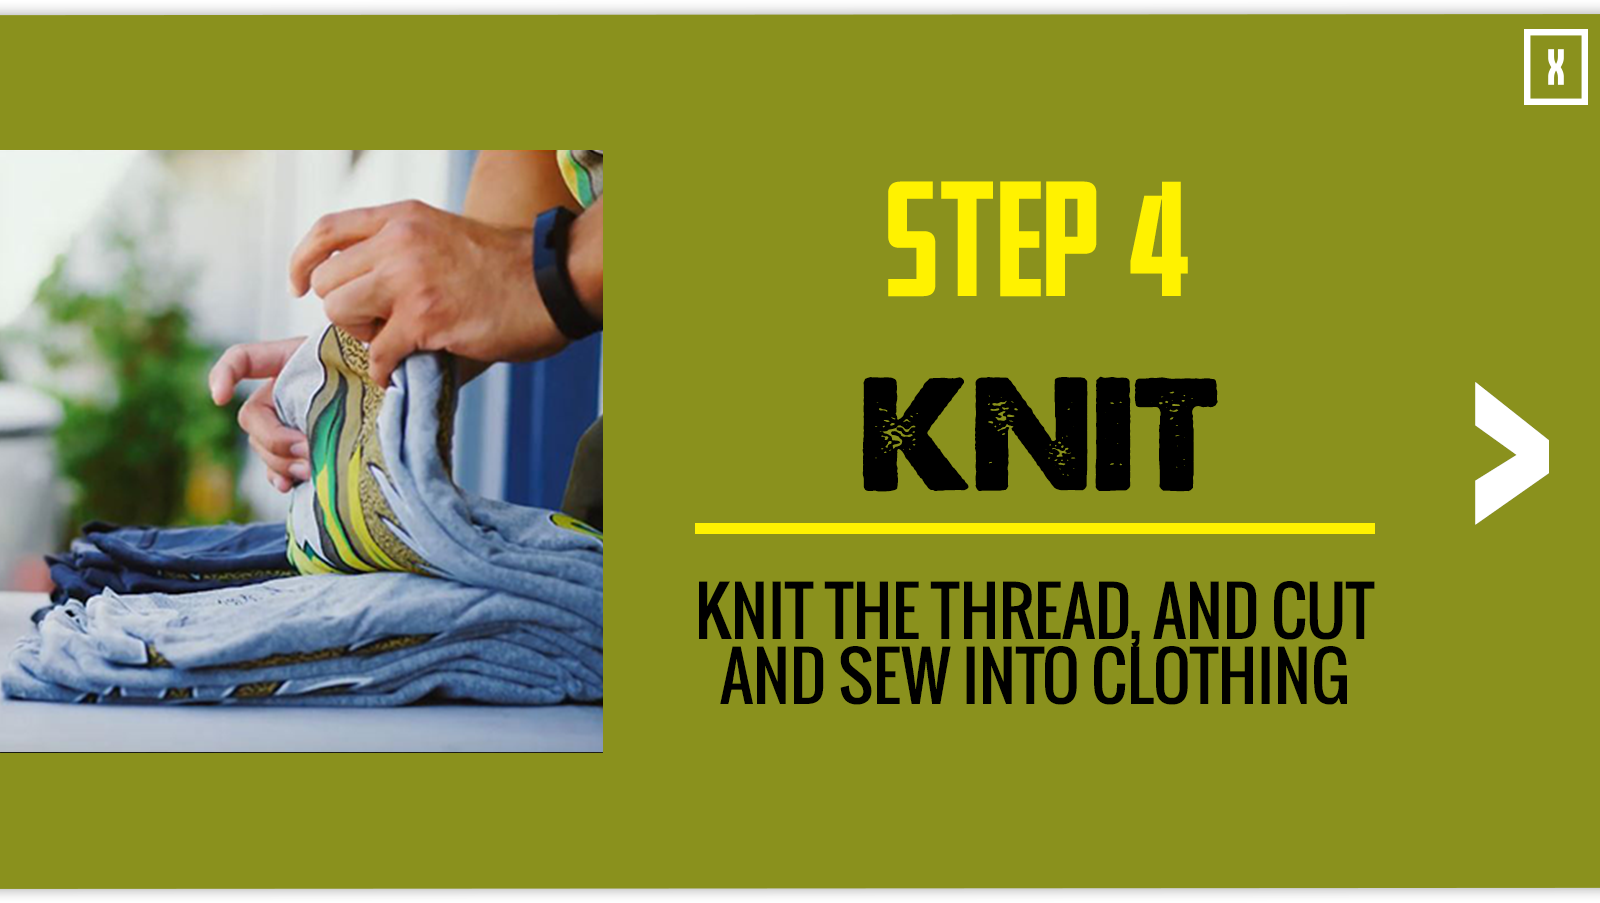 Step 4: Knit the thread and cut and sew into clothing